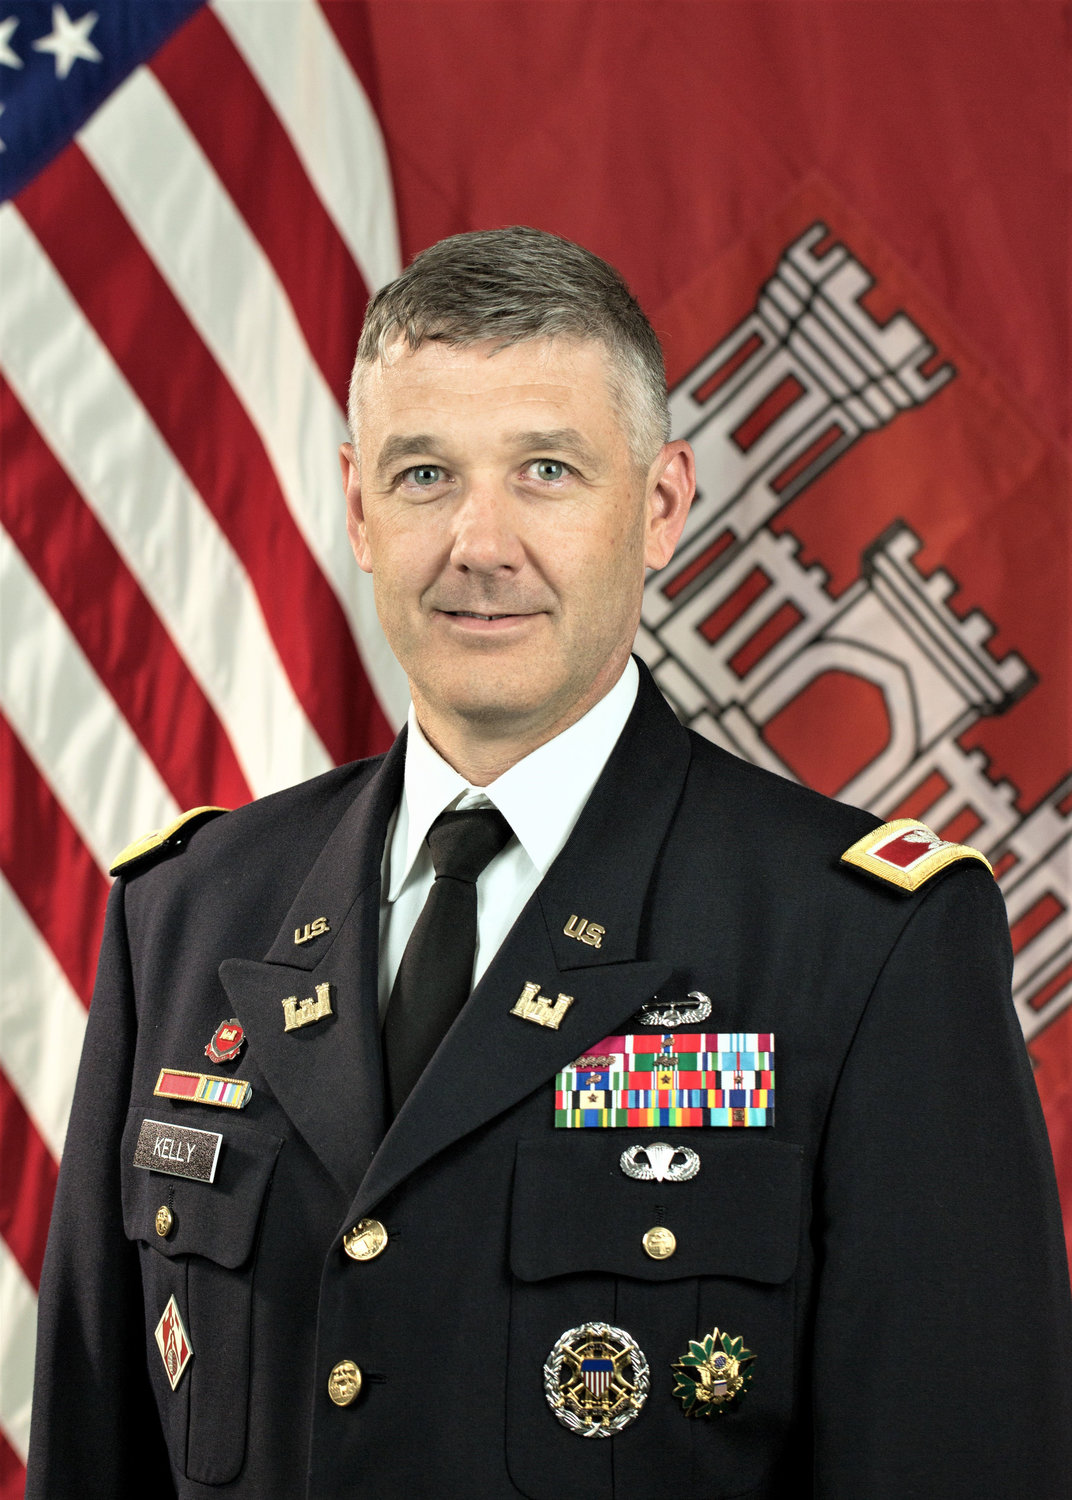 Colonel Andrew Kelly, District Commander, US Army Corps of Engineers.